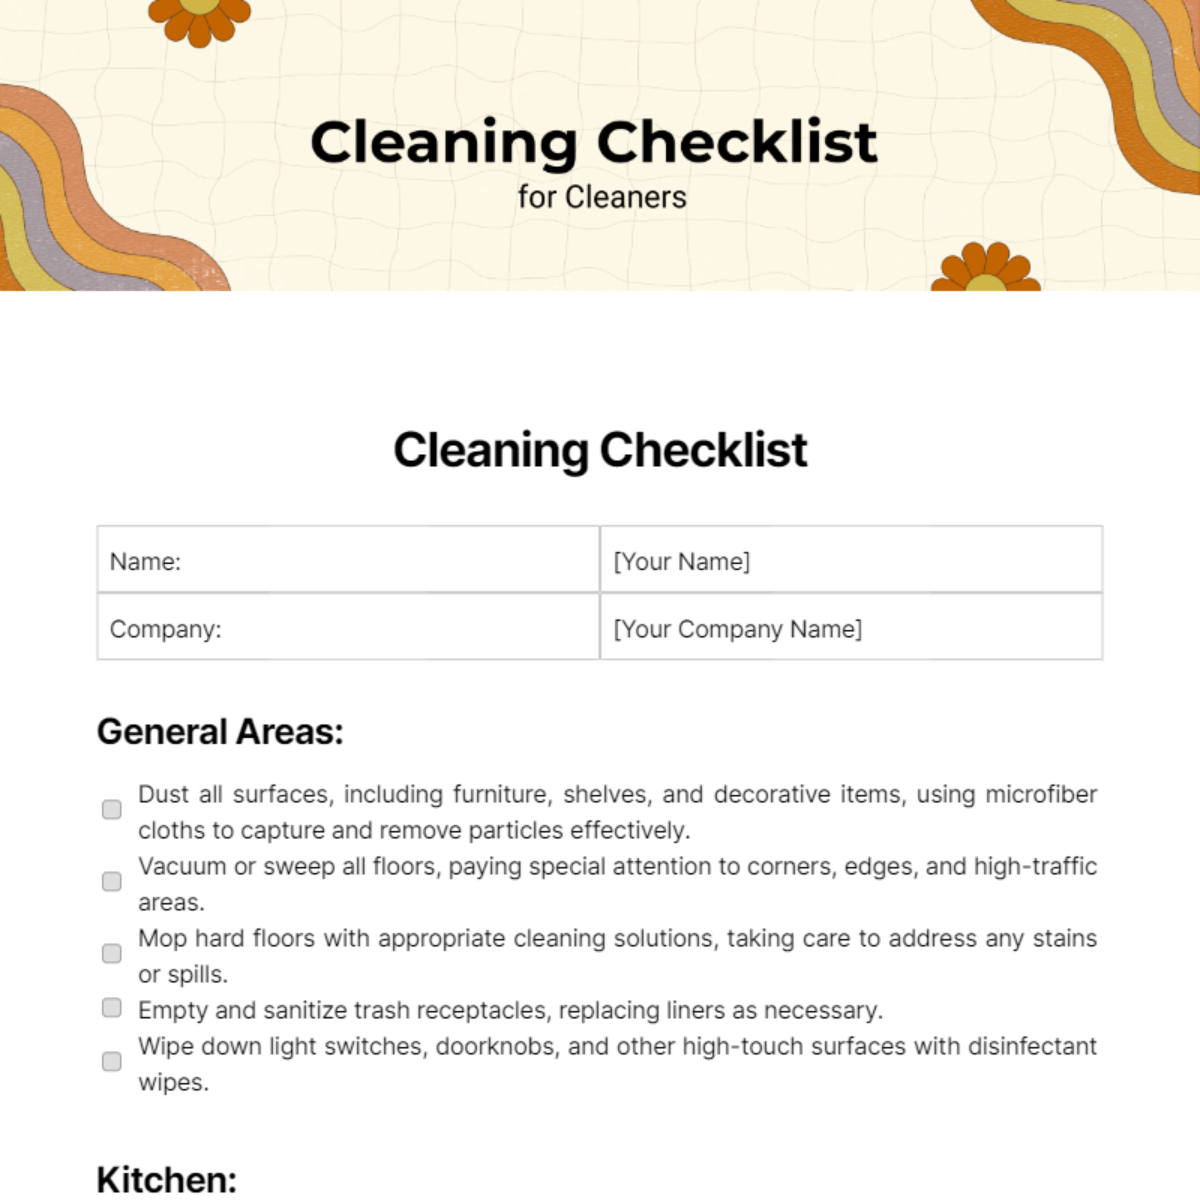 Free Cleaning Checklist For Cleaners Template